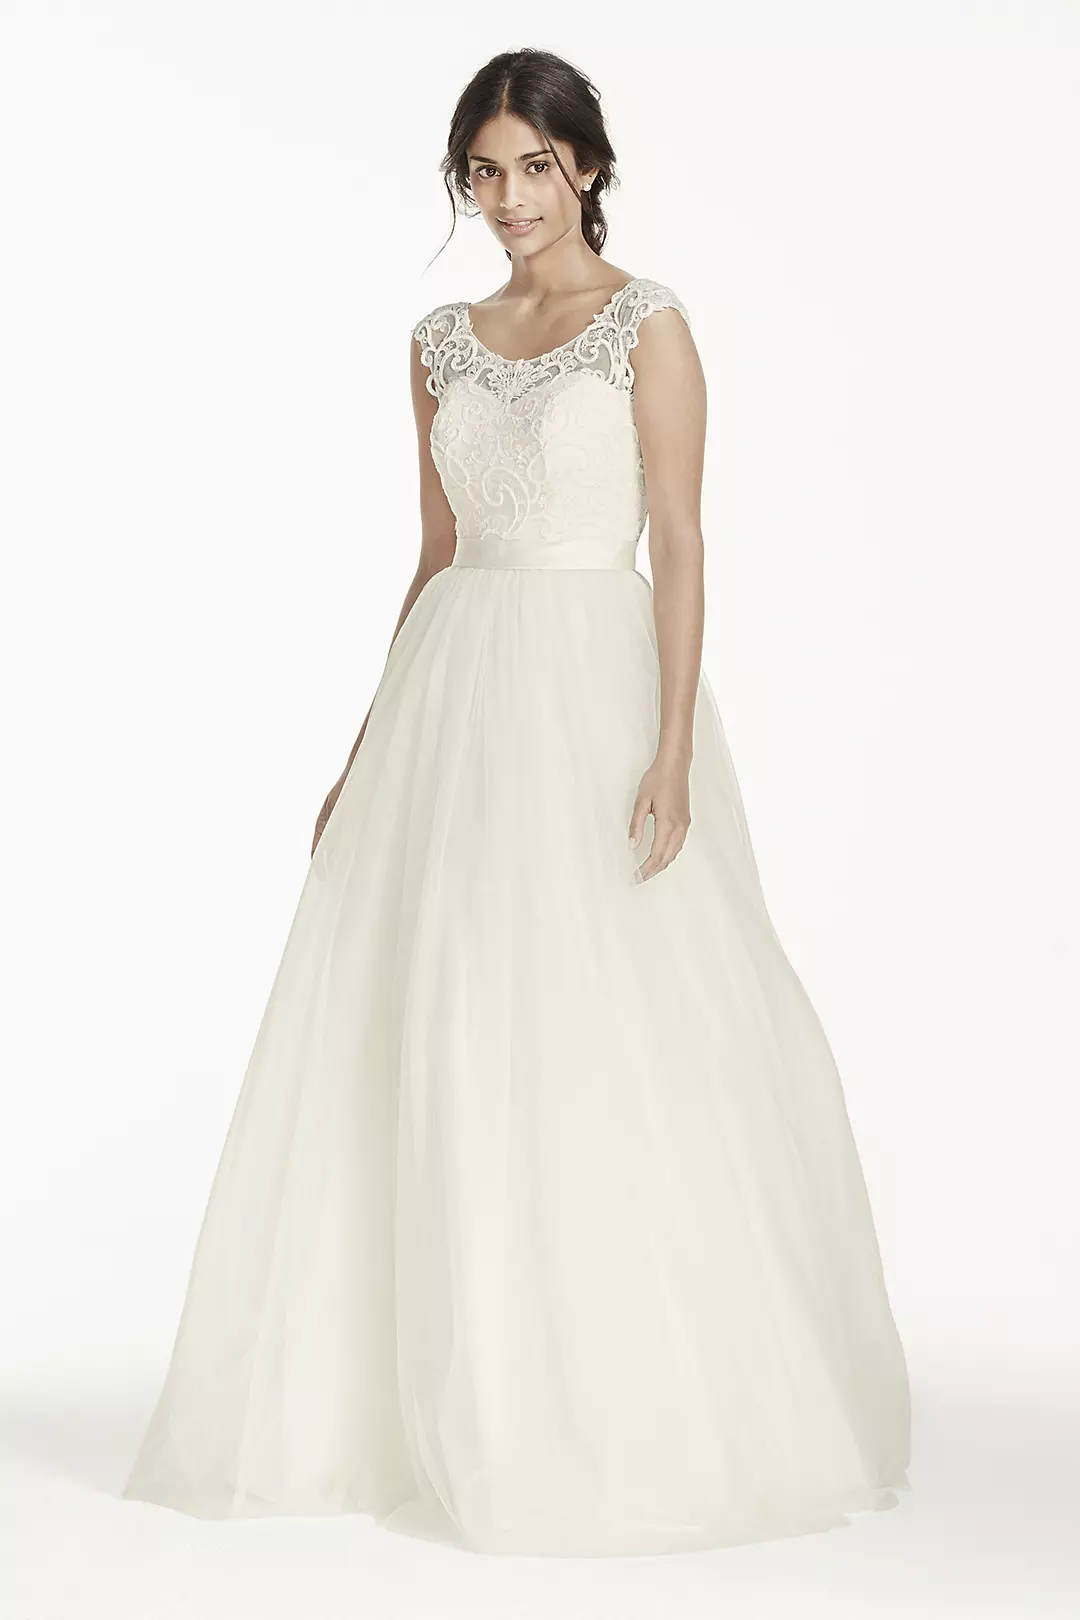 As-Is Tulle Wedding Dress with Lace Illusion Neck Image